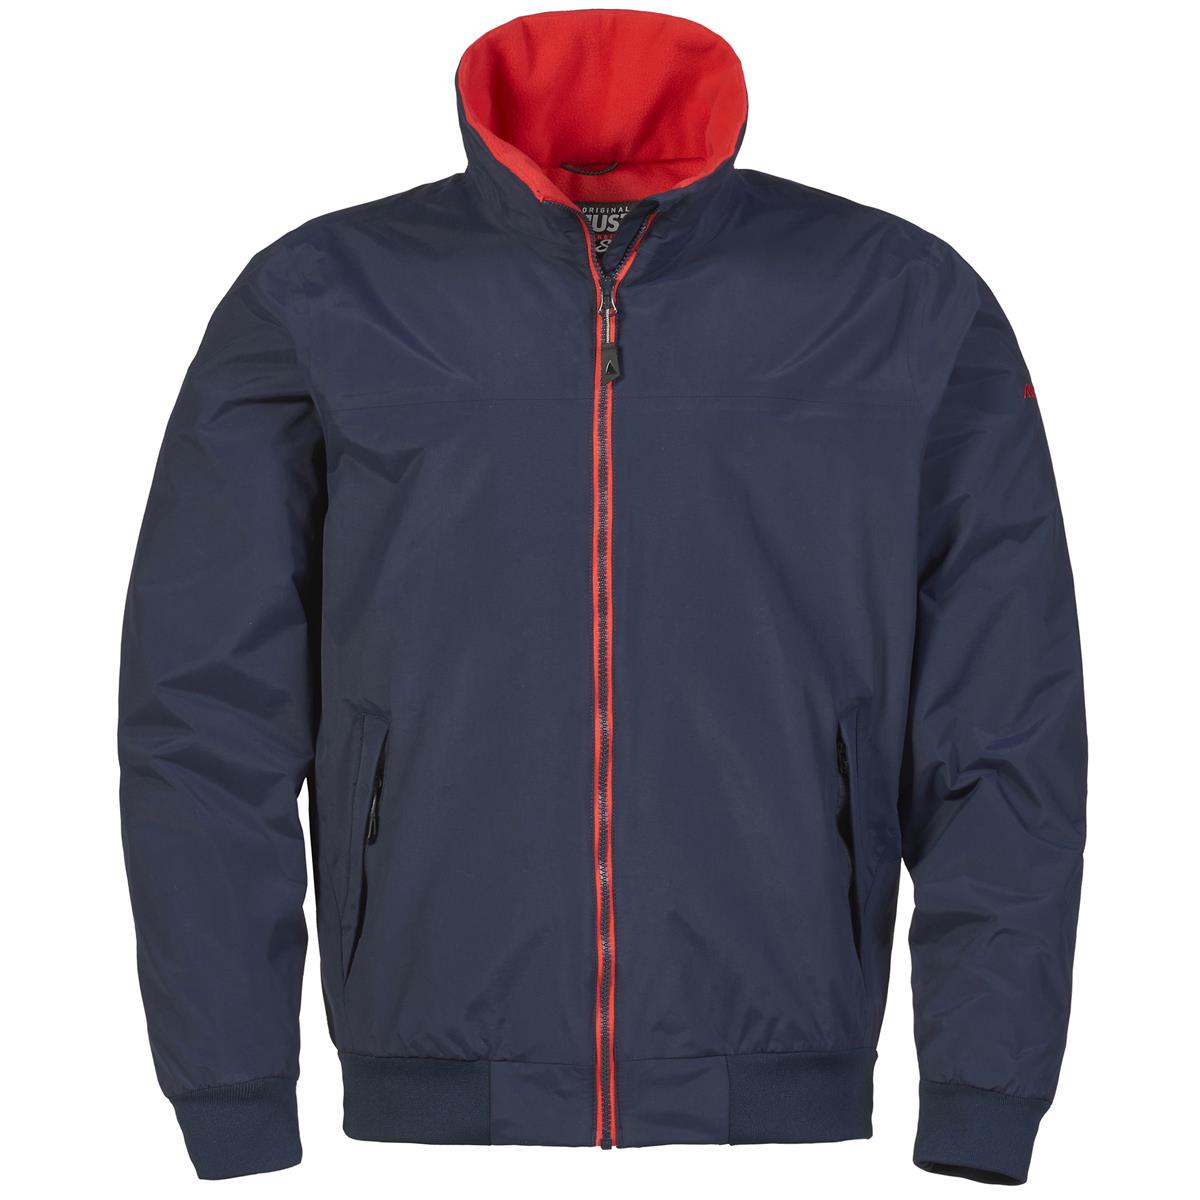 Is the Musto Snug Blouson Jacket 2.0 a practical and stylish choice?